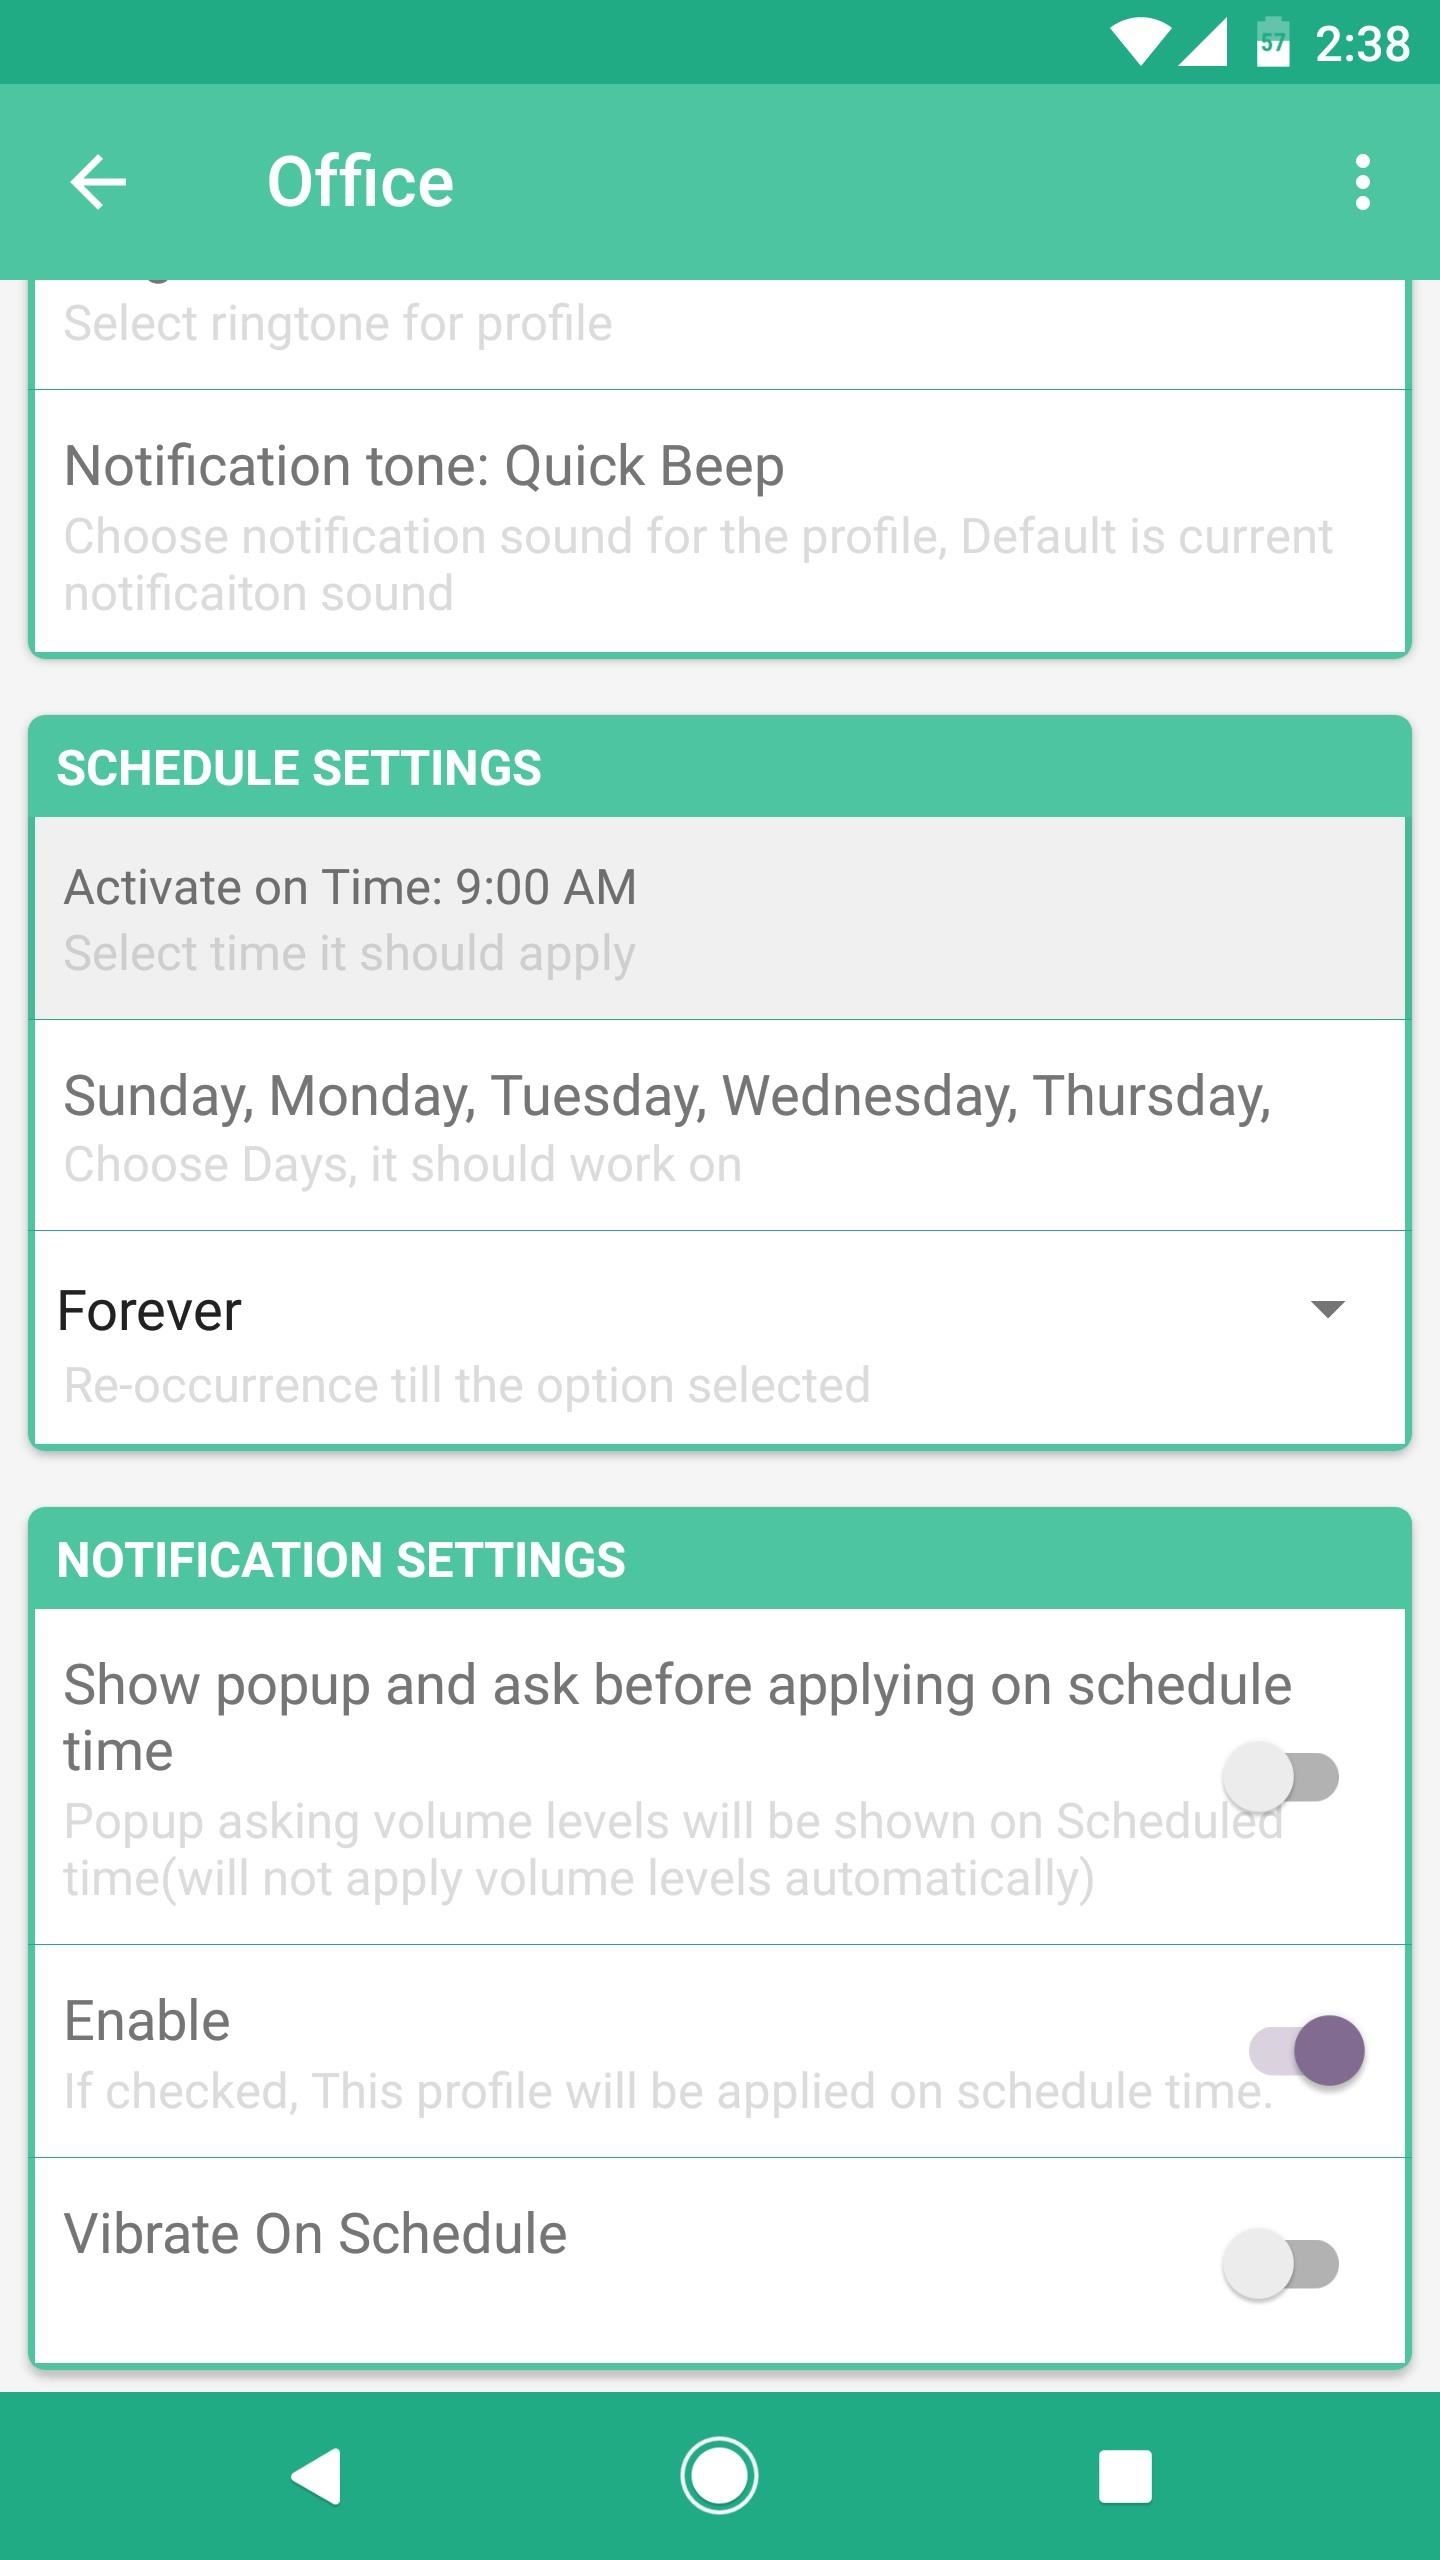 How to Set Volume Levels to Change During Scheduled Times on Android